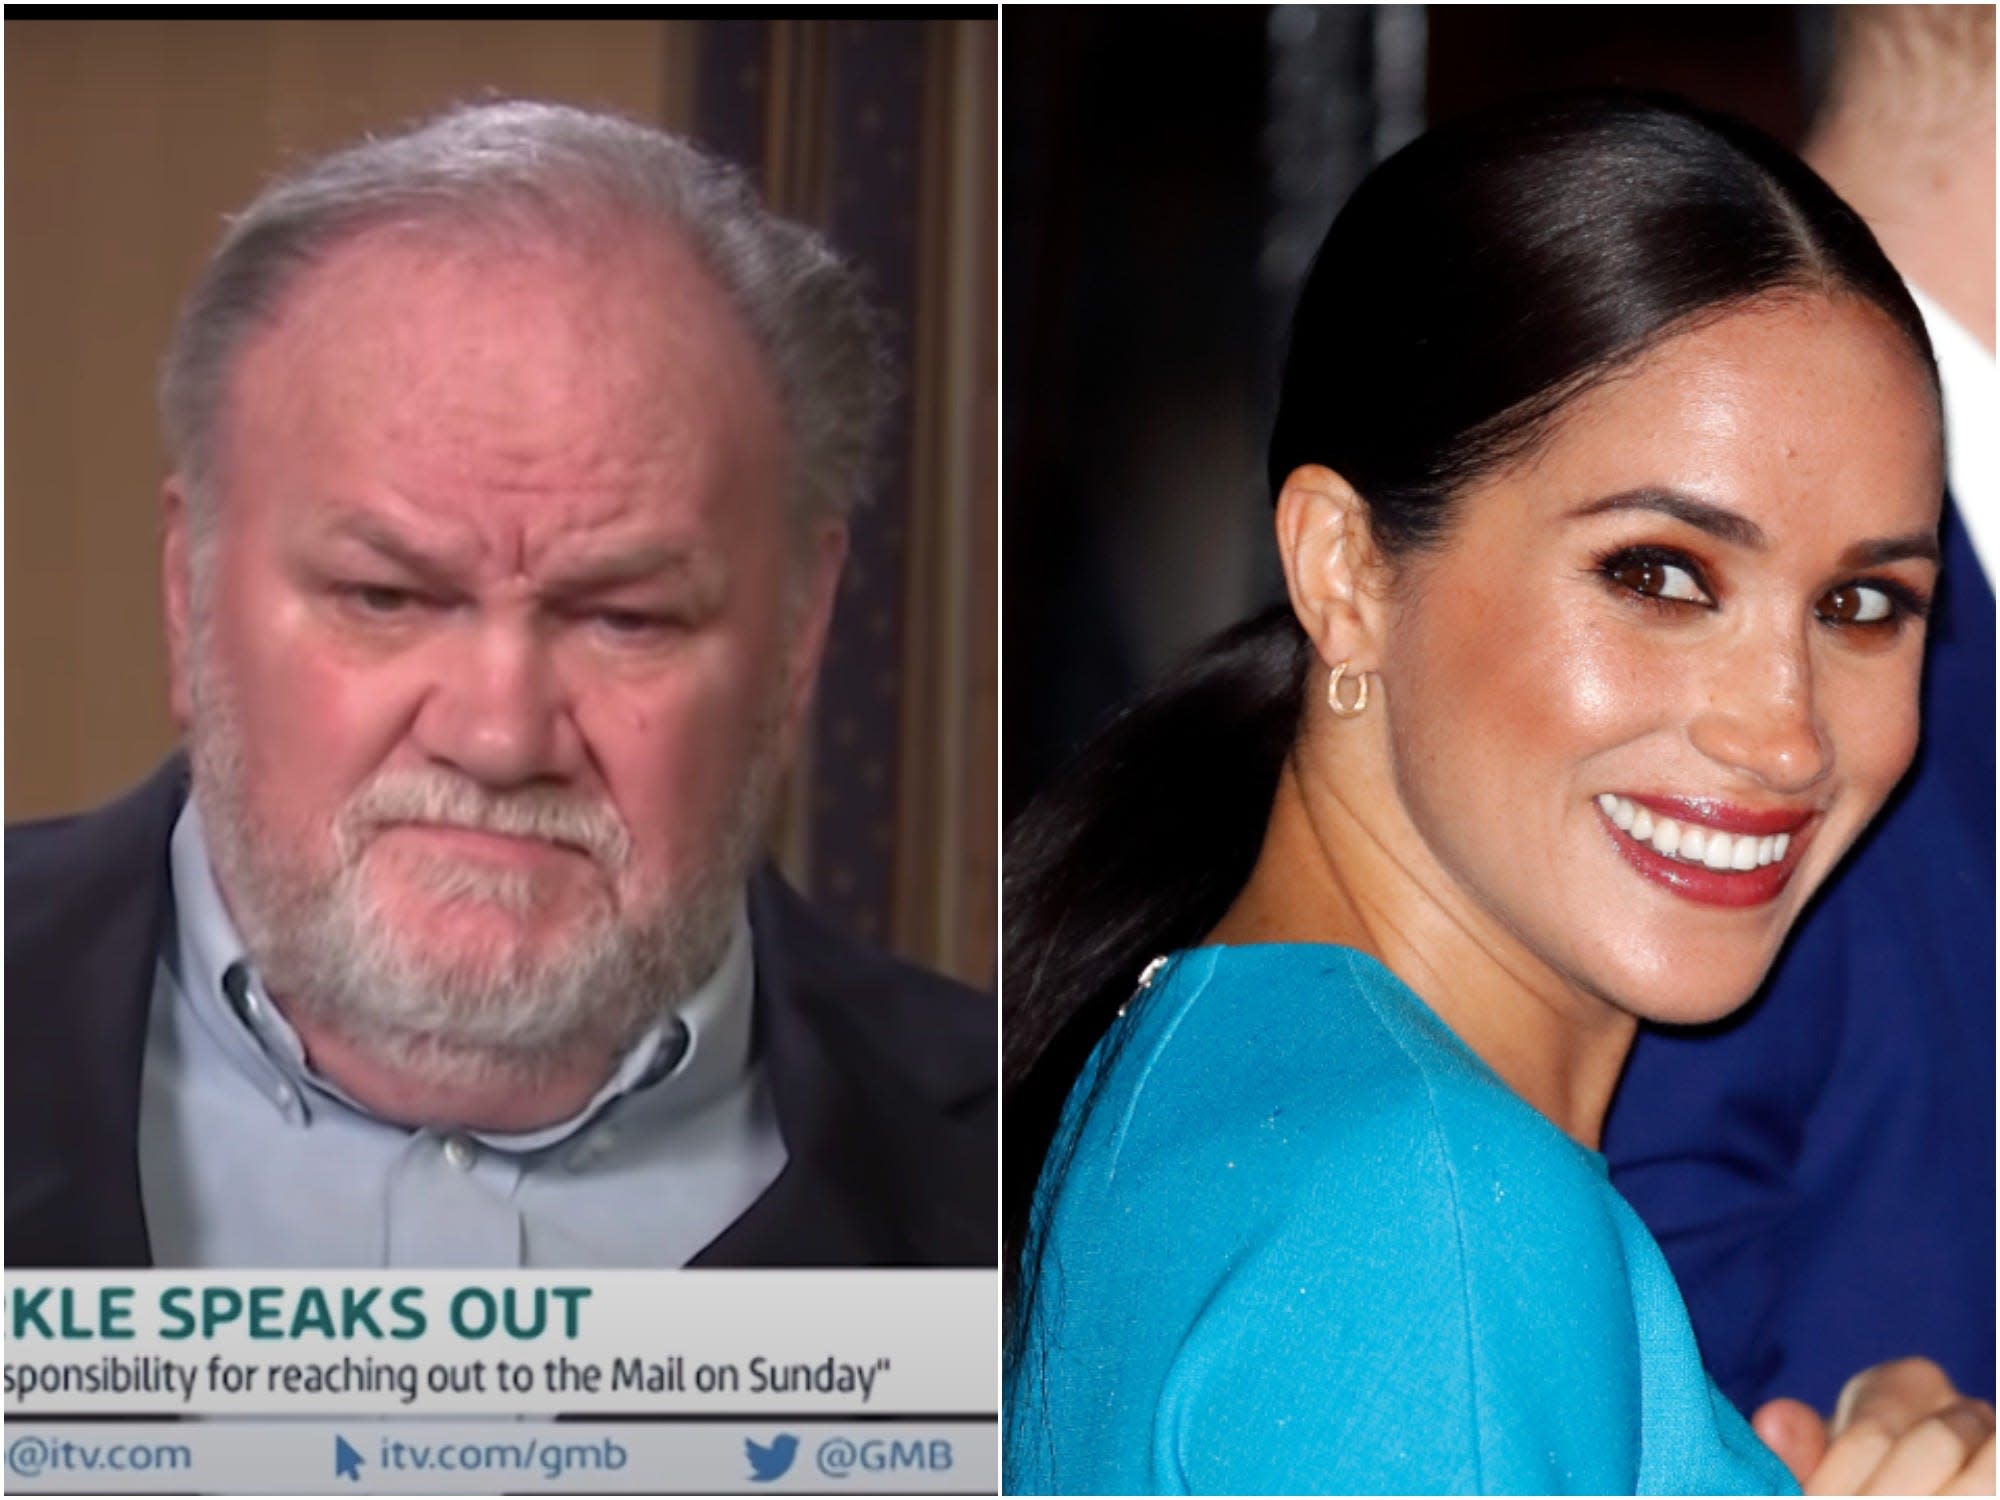 Meghan Markle’s estranged father, Thomas Markle, says he’s making a documentary to find out what went wrong between them